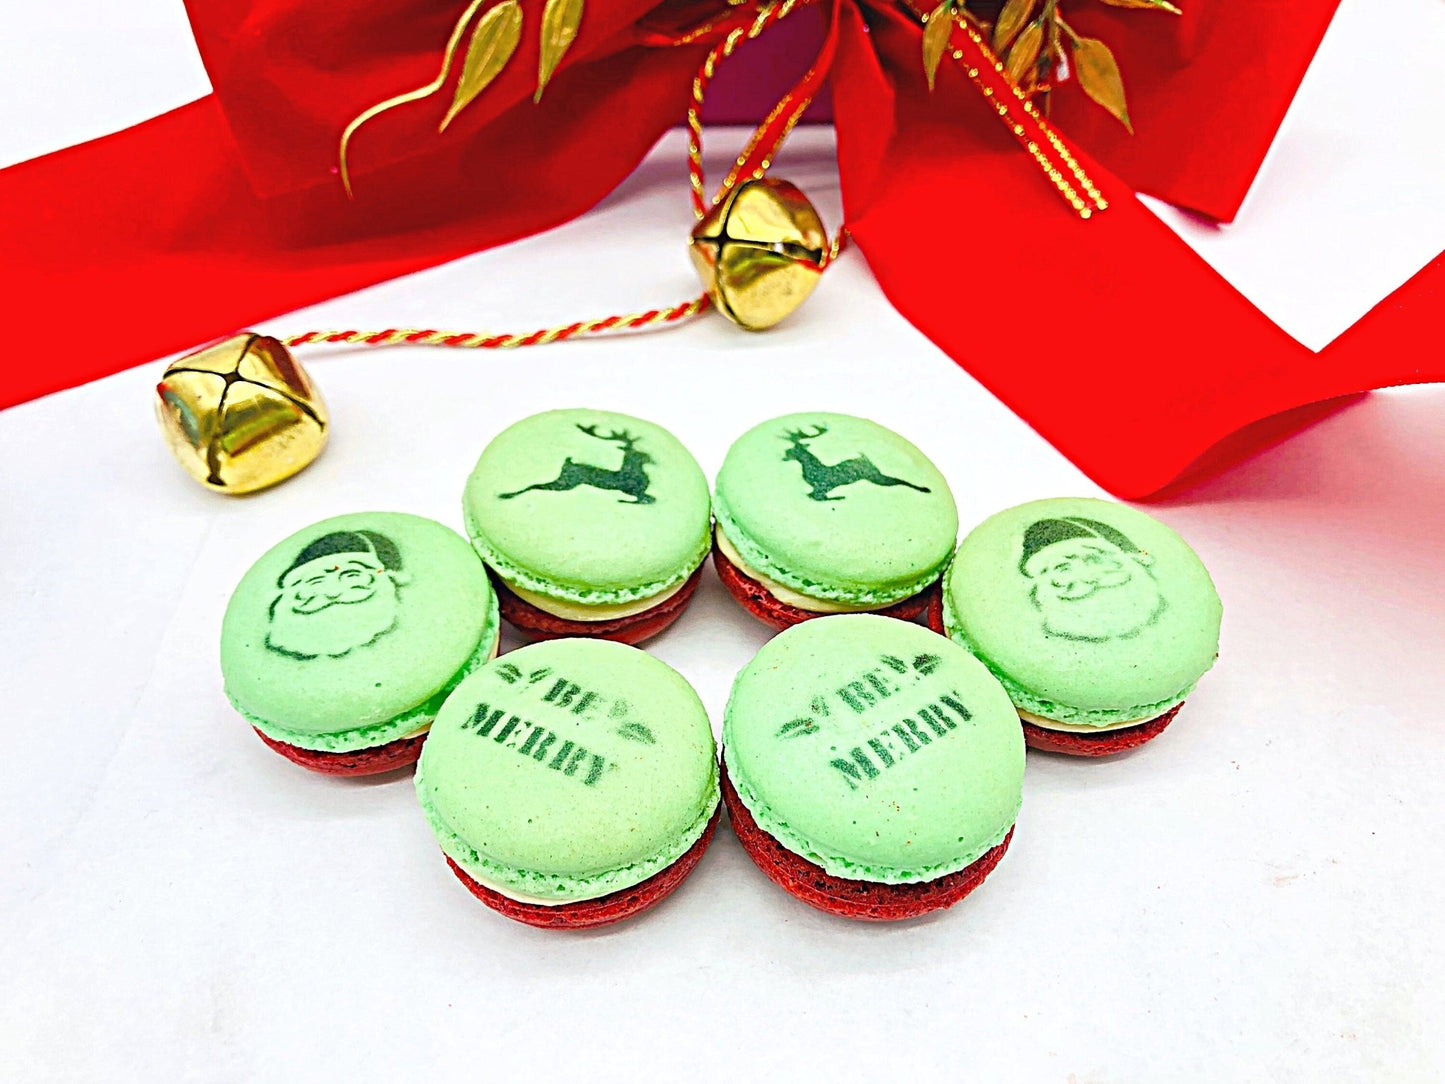 The Santa Clause Apple Caramel French Macarons - Macaron Centrale6 pack